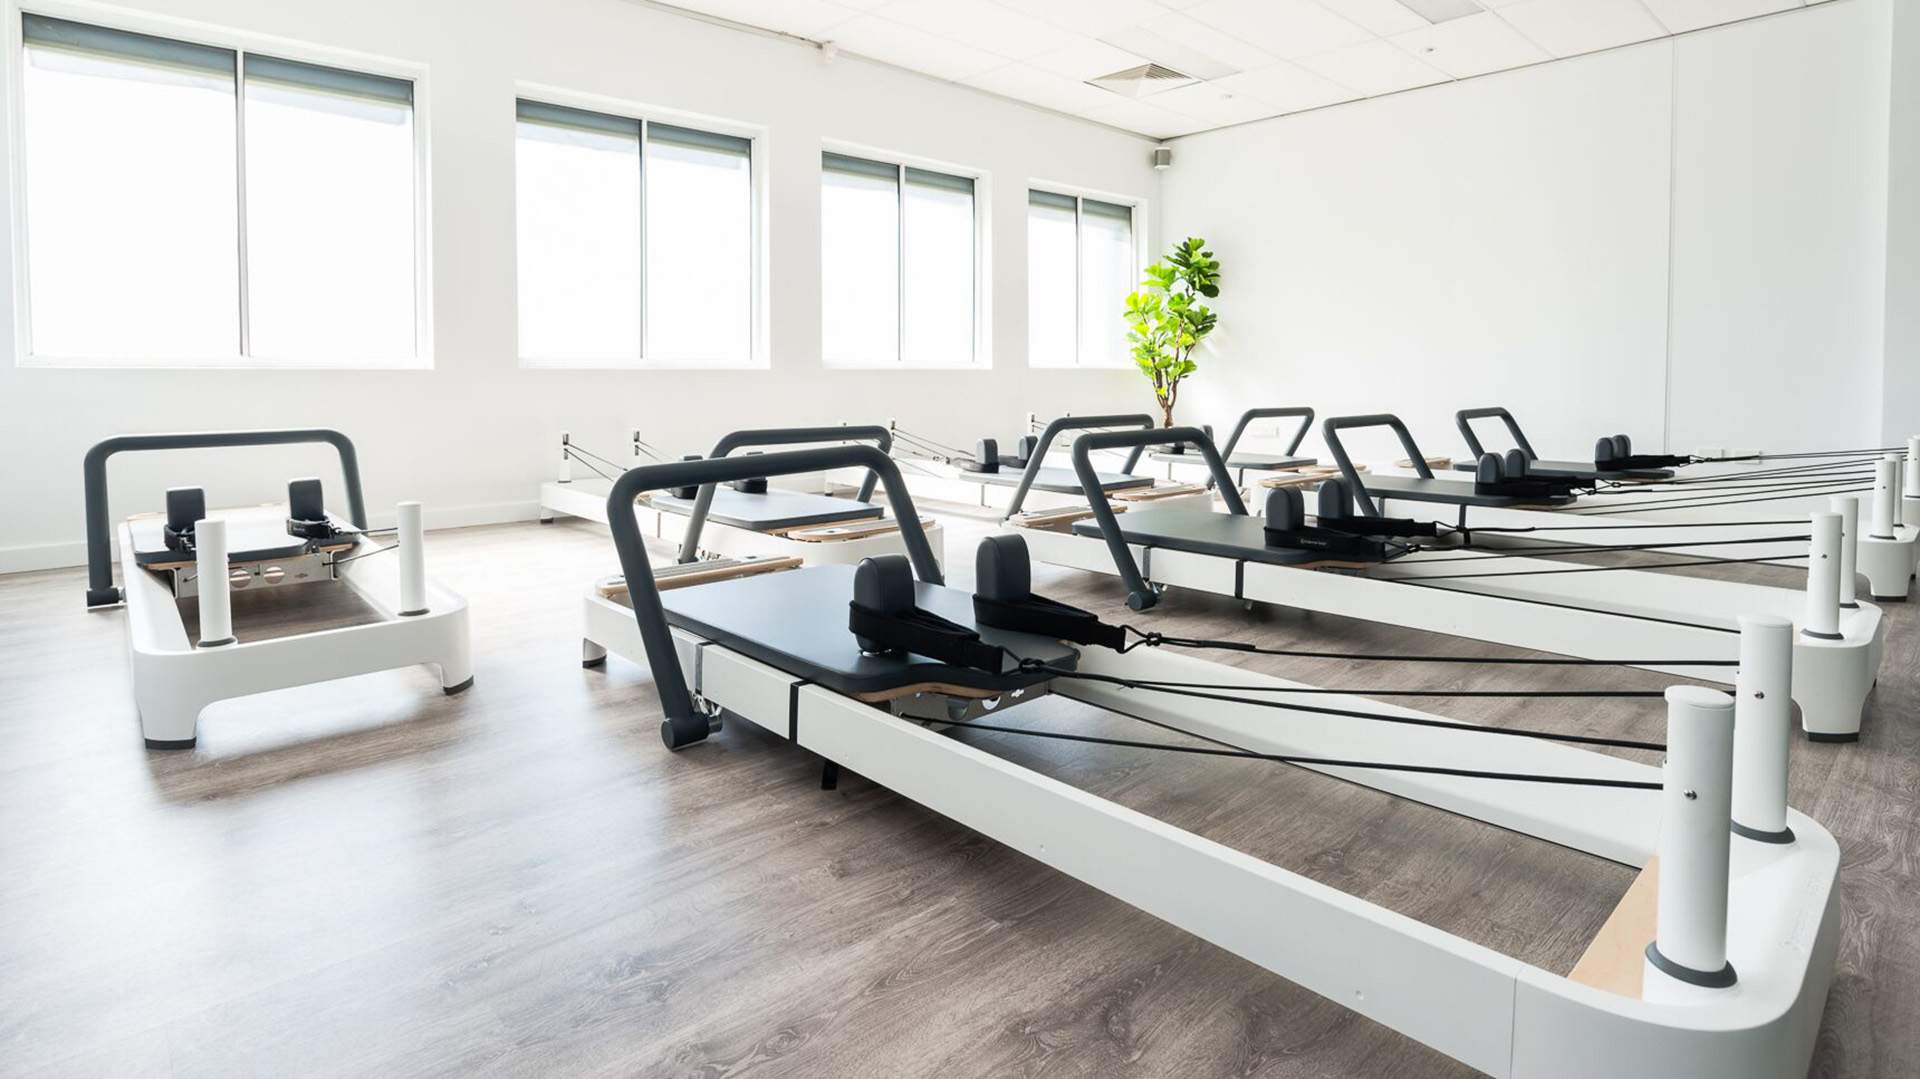 All for One Is Yarraville's New Greenery-Filled Full-Service Health and Wellness Studio